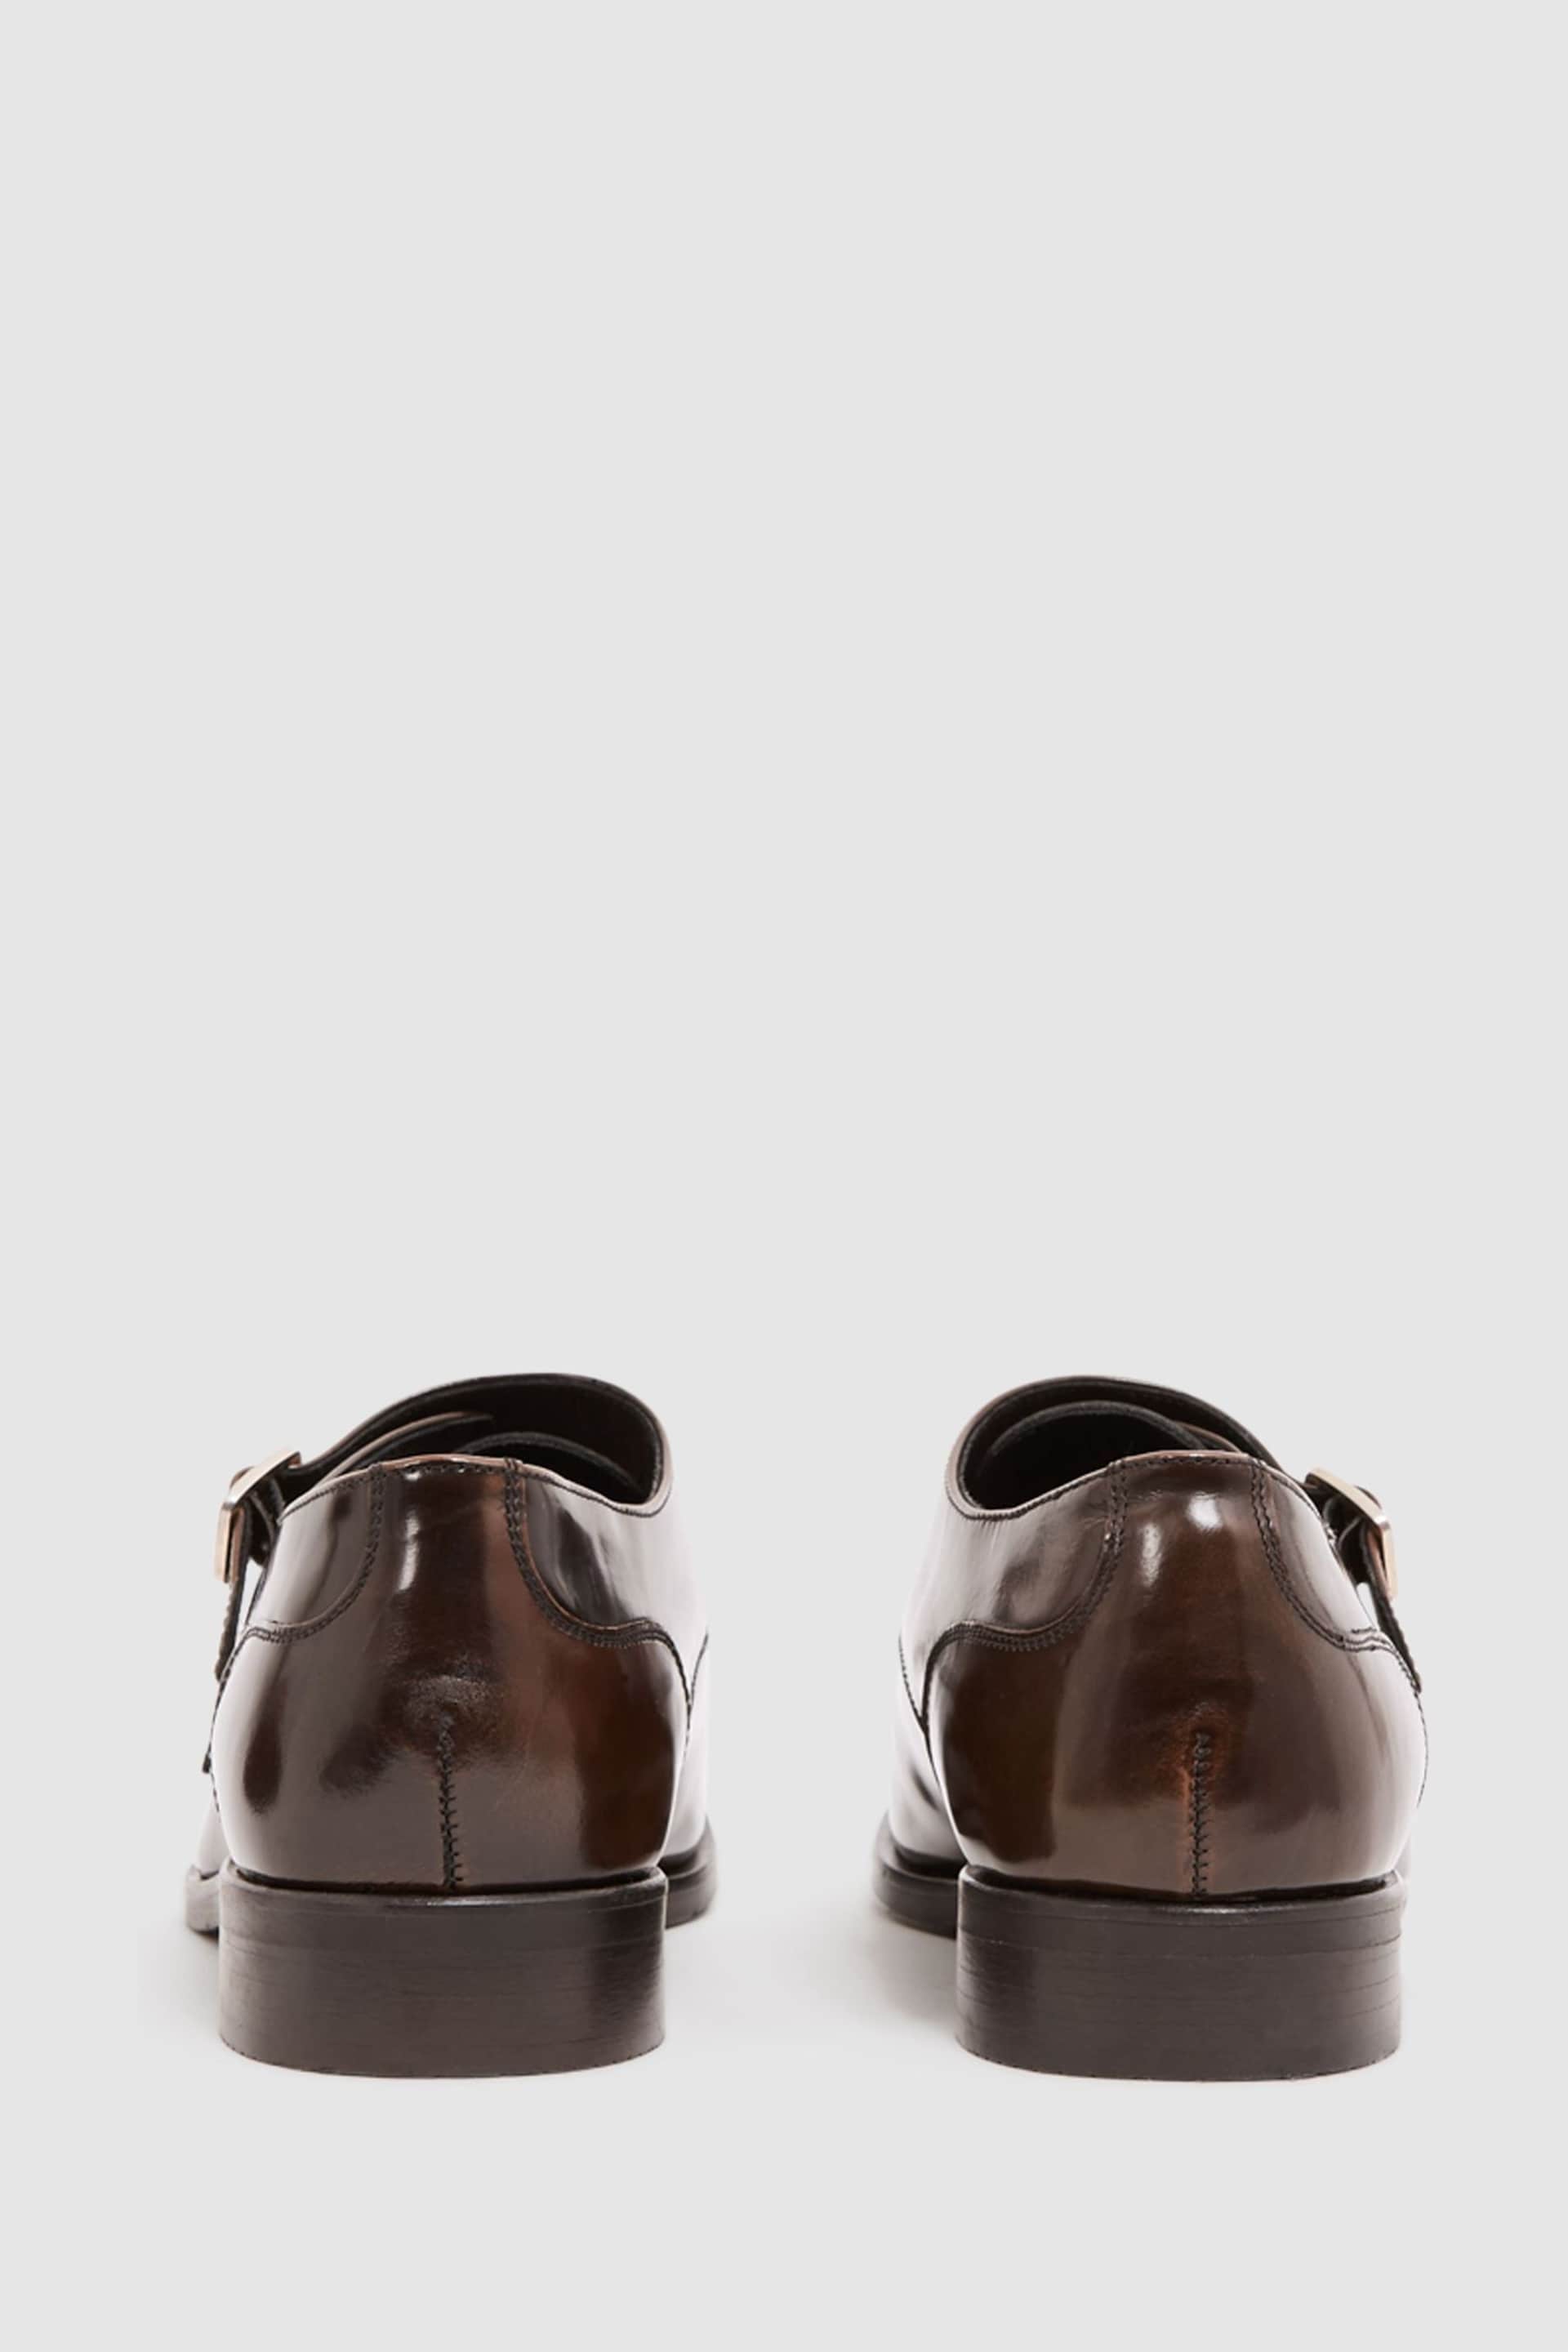 Reiss Brown Rivington Leather Monk Strap Shoes - Image 6 of 6